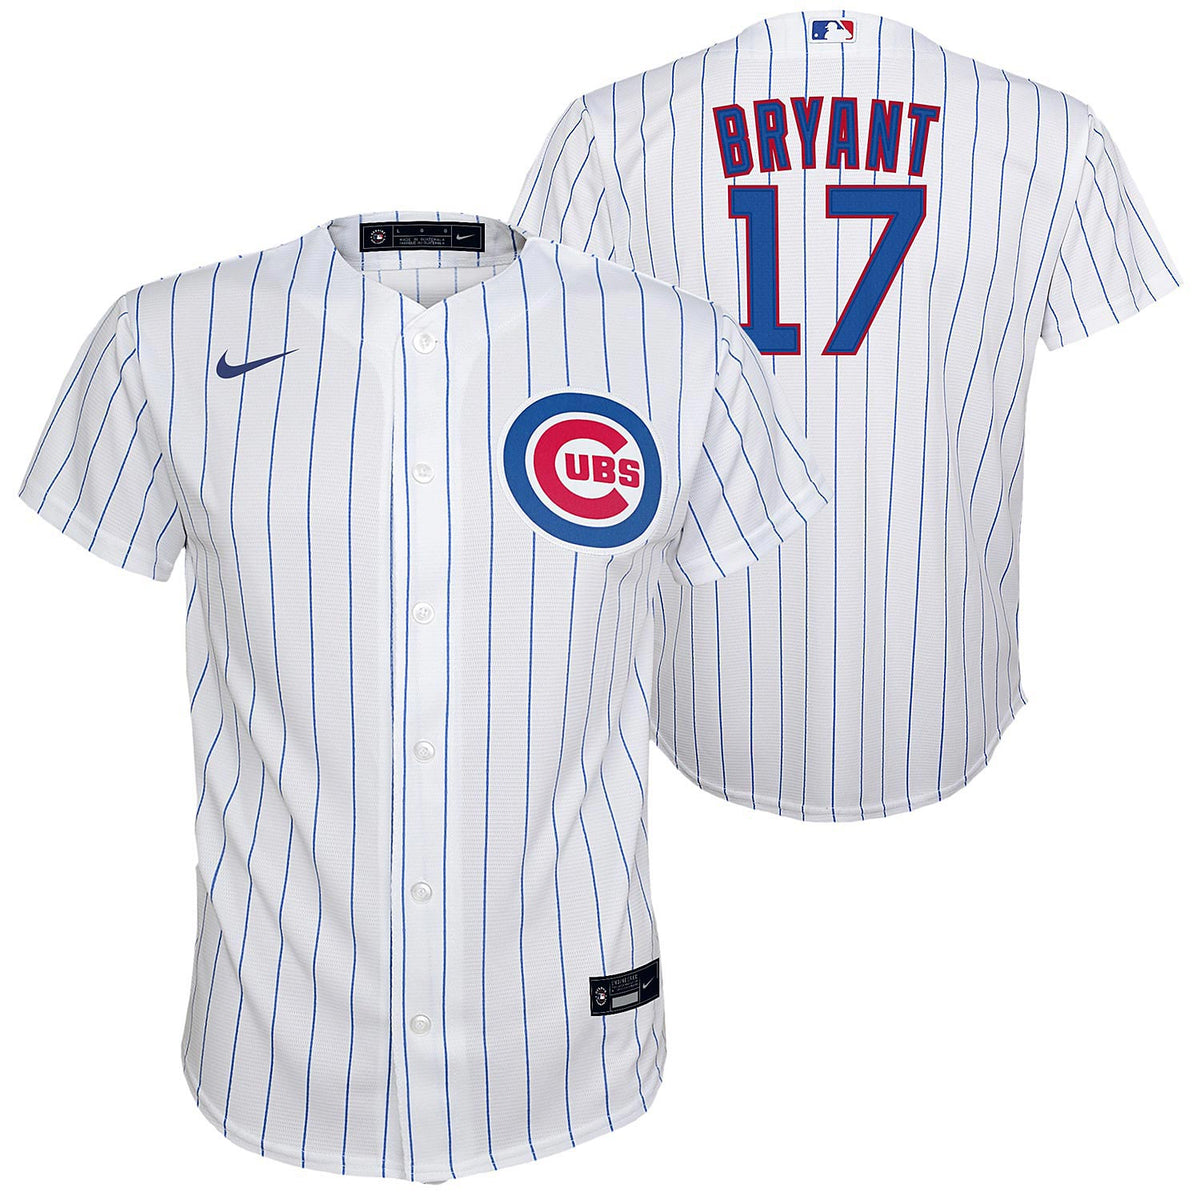 .com: Kris Bryant Chicago Cubs #17 Red Youth Player Fashion